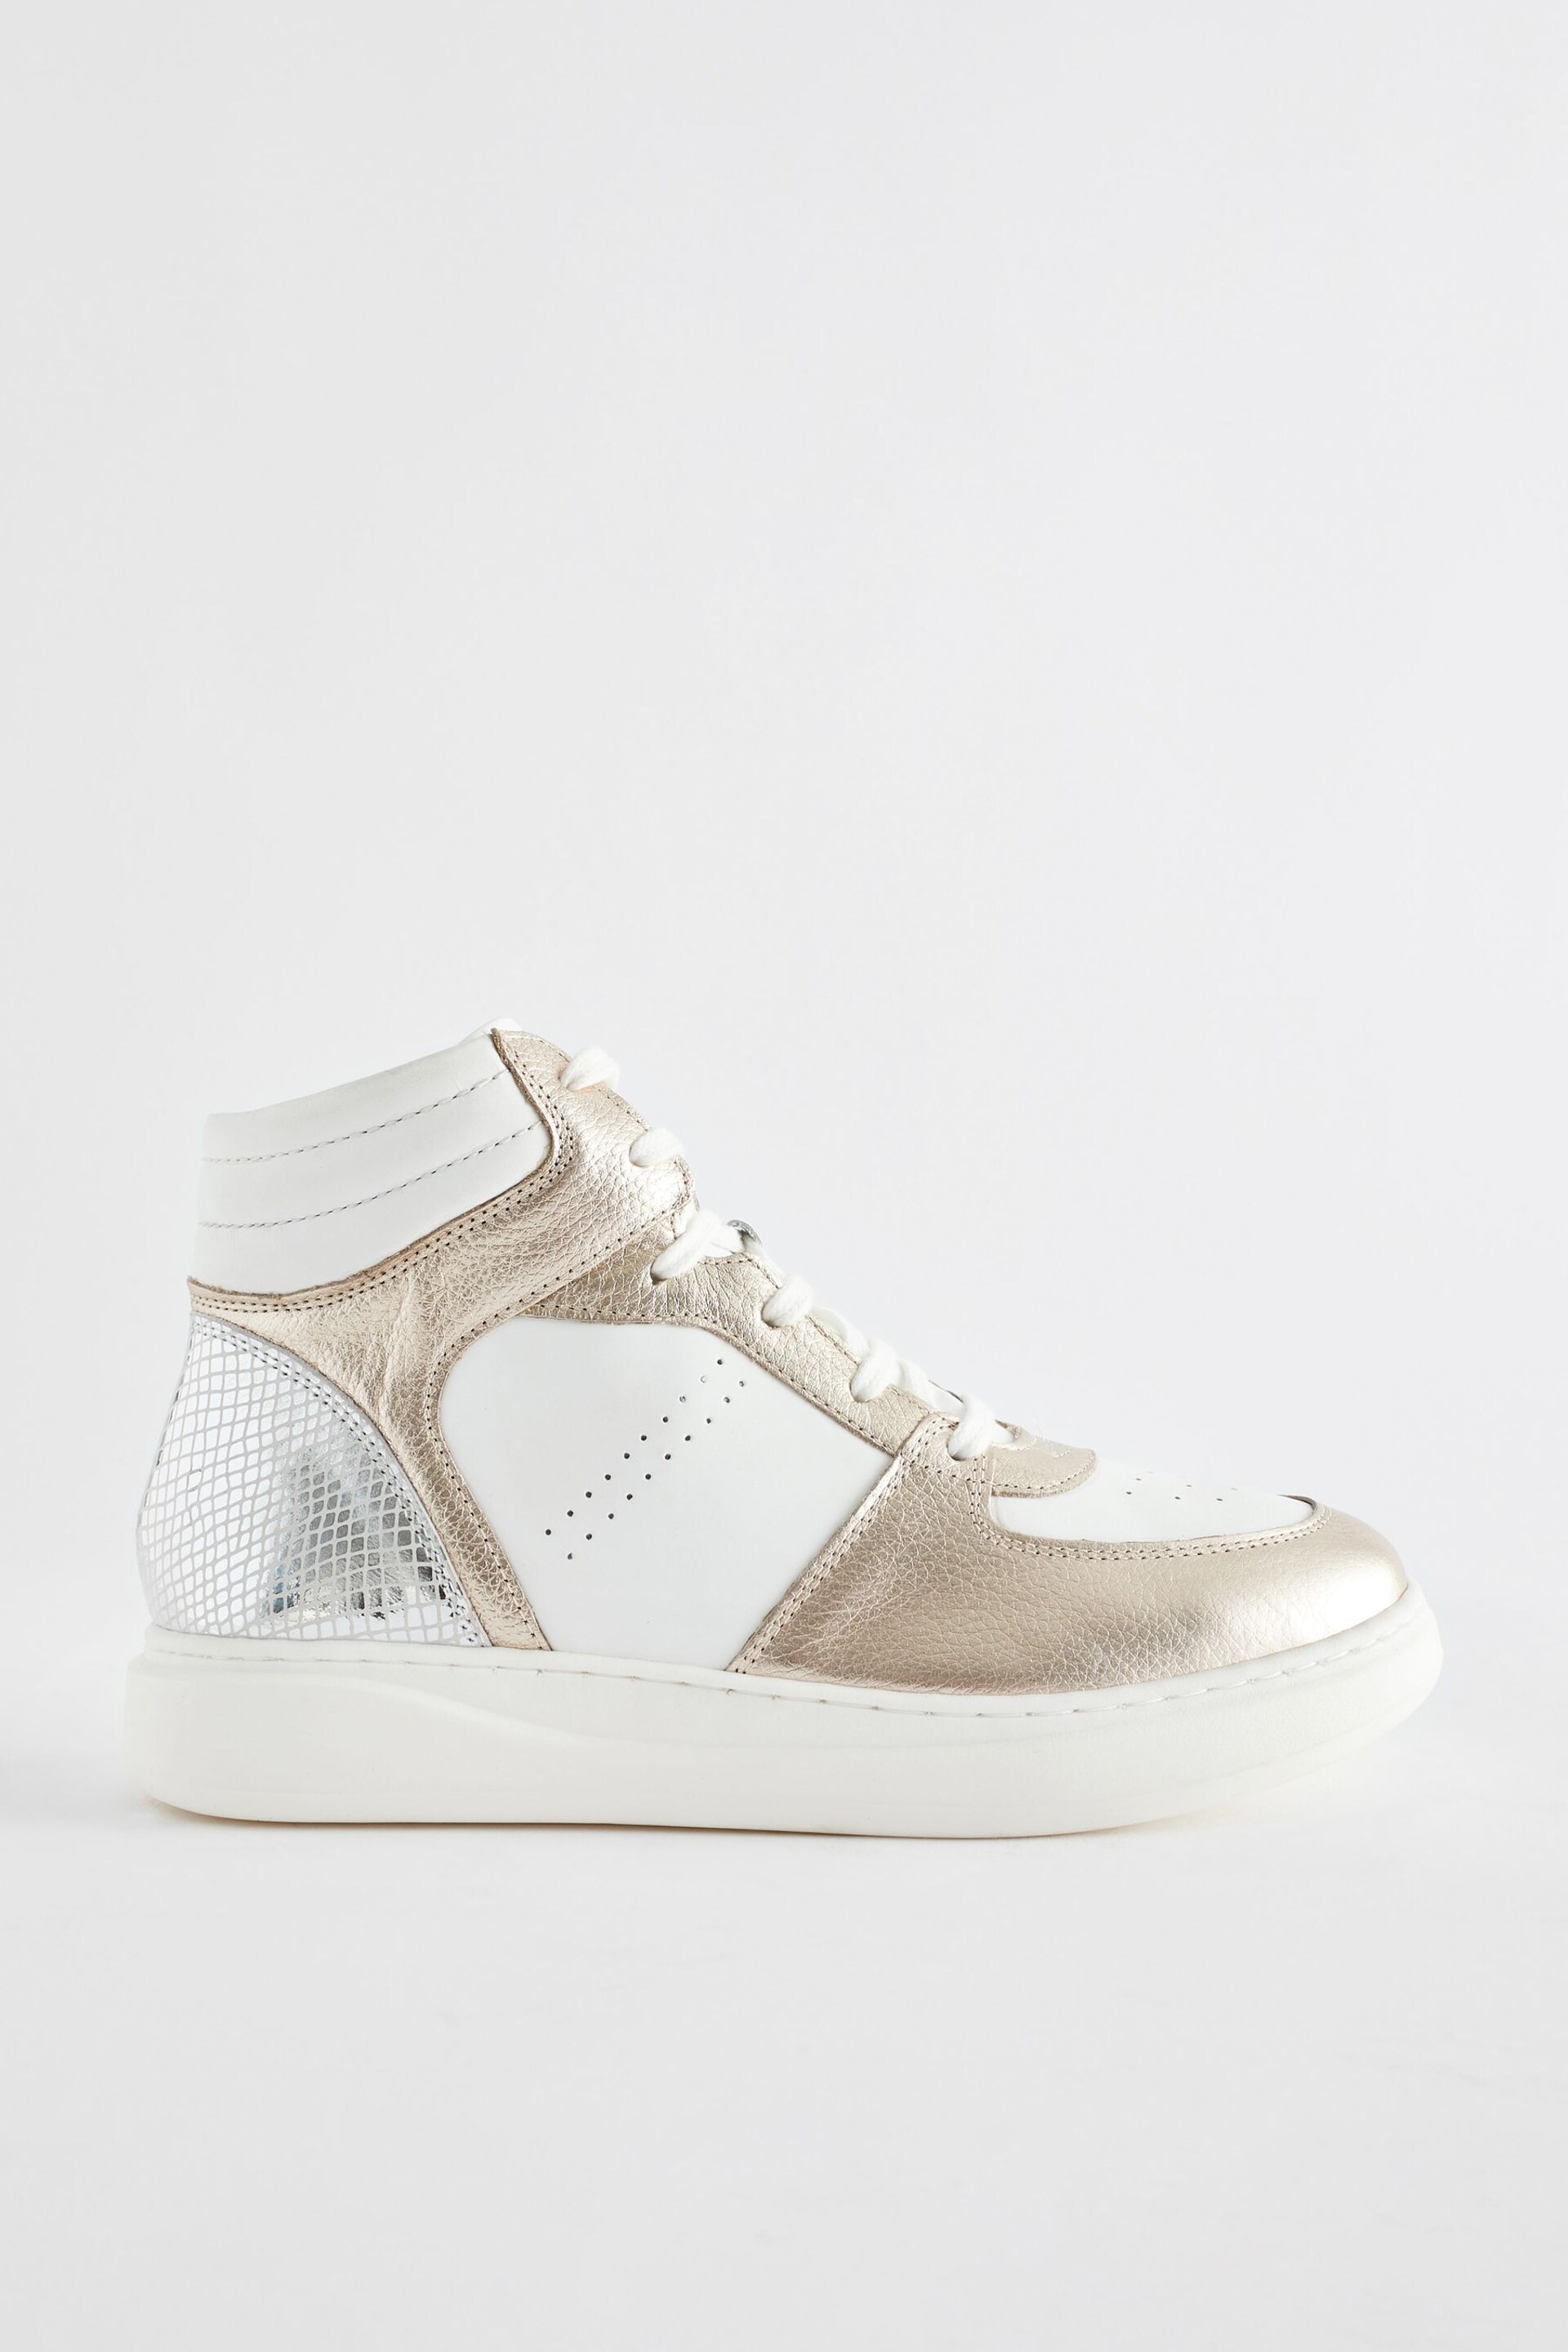 White/Gold Signature Leather High Top Trainers - Image 2 of 5